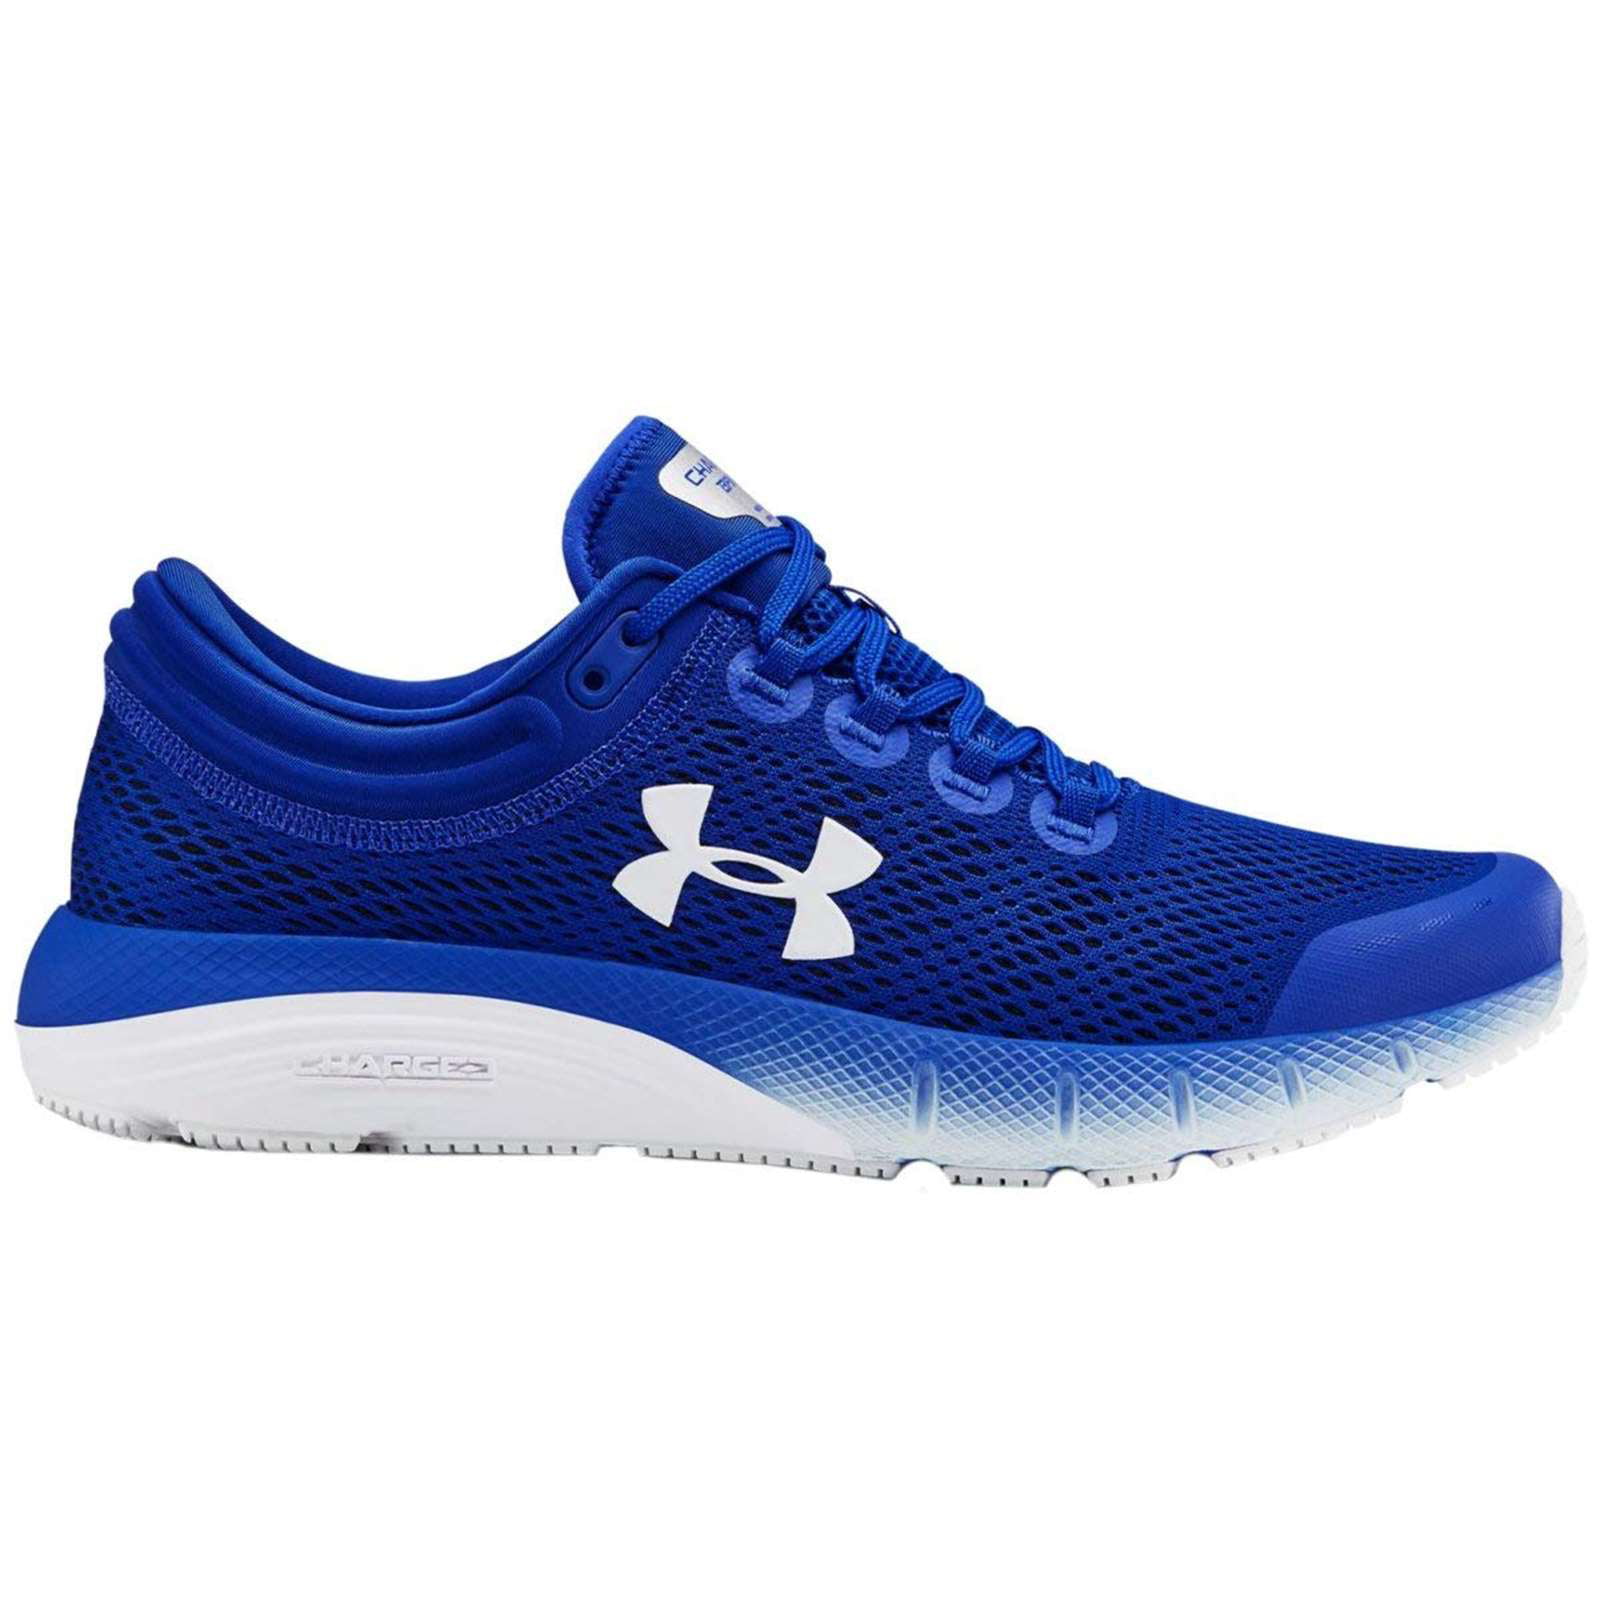 Under Armour Charged Bandit Mens Running Shoes Grey Blue Cushioned Trainers Men 